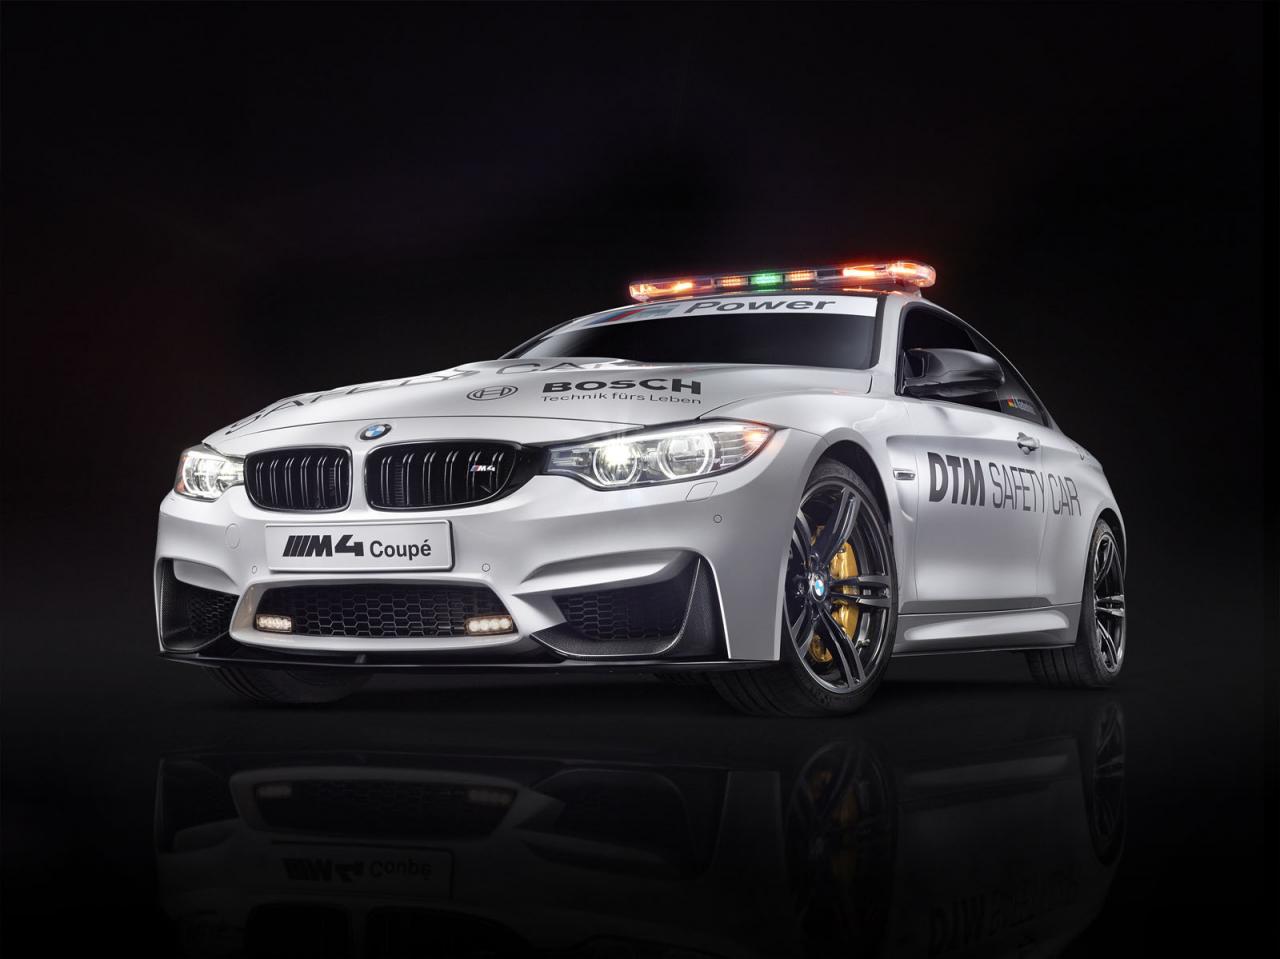 BMW M4 Coupe DTM safety car2